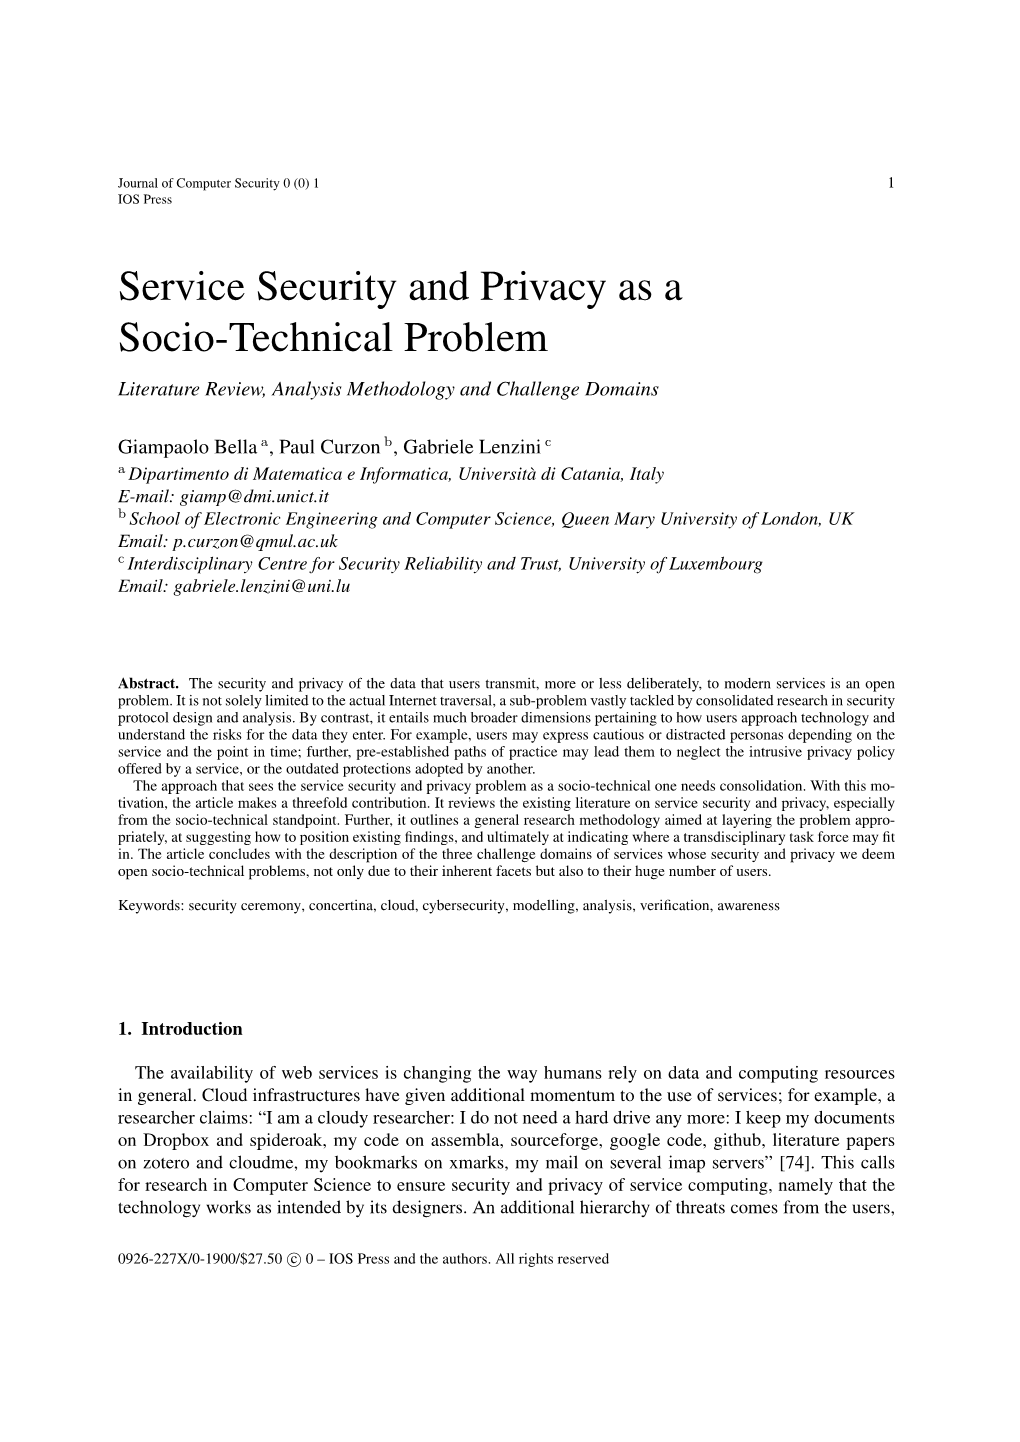 Service Security and Privacy As a Socio-Technical Problem Literature Review, Analysis Methodology and Challenge Domains